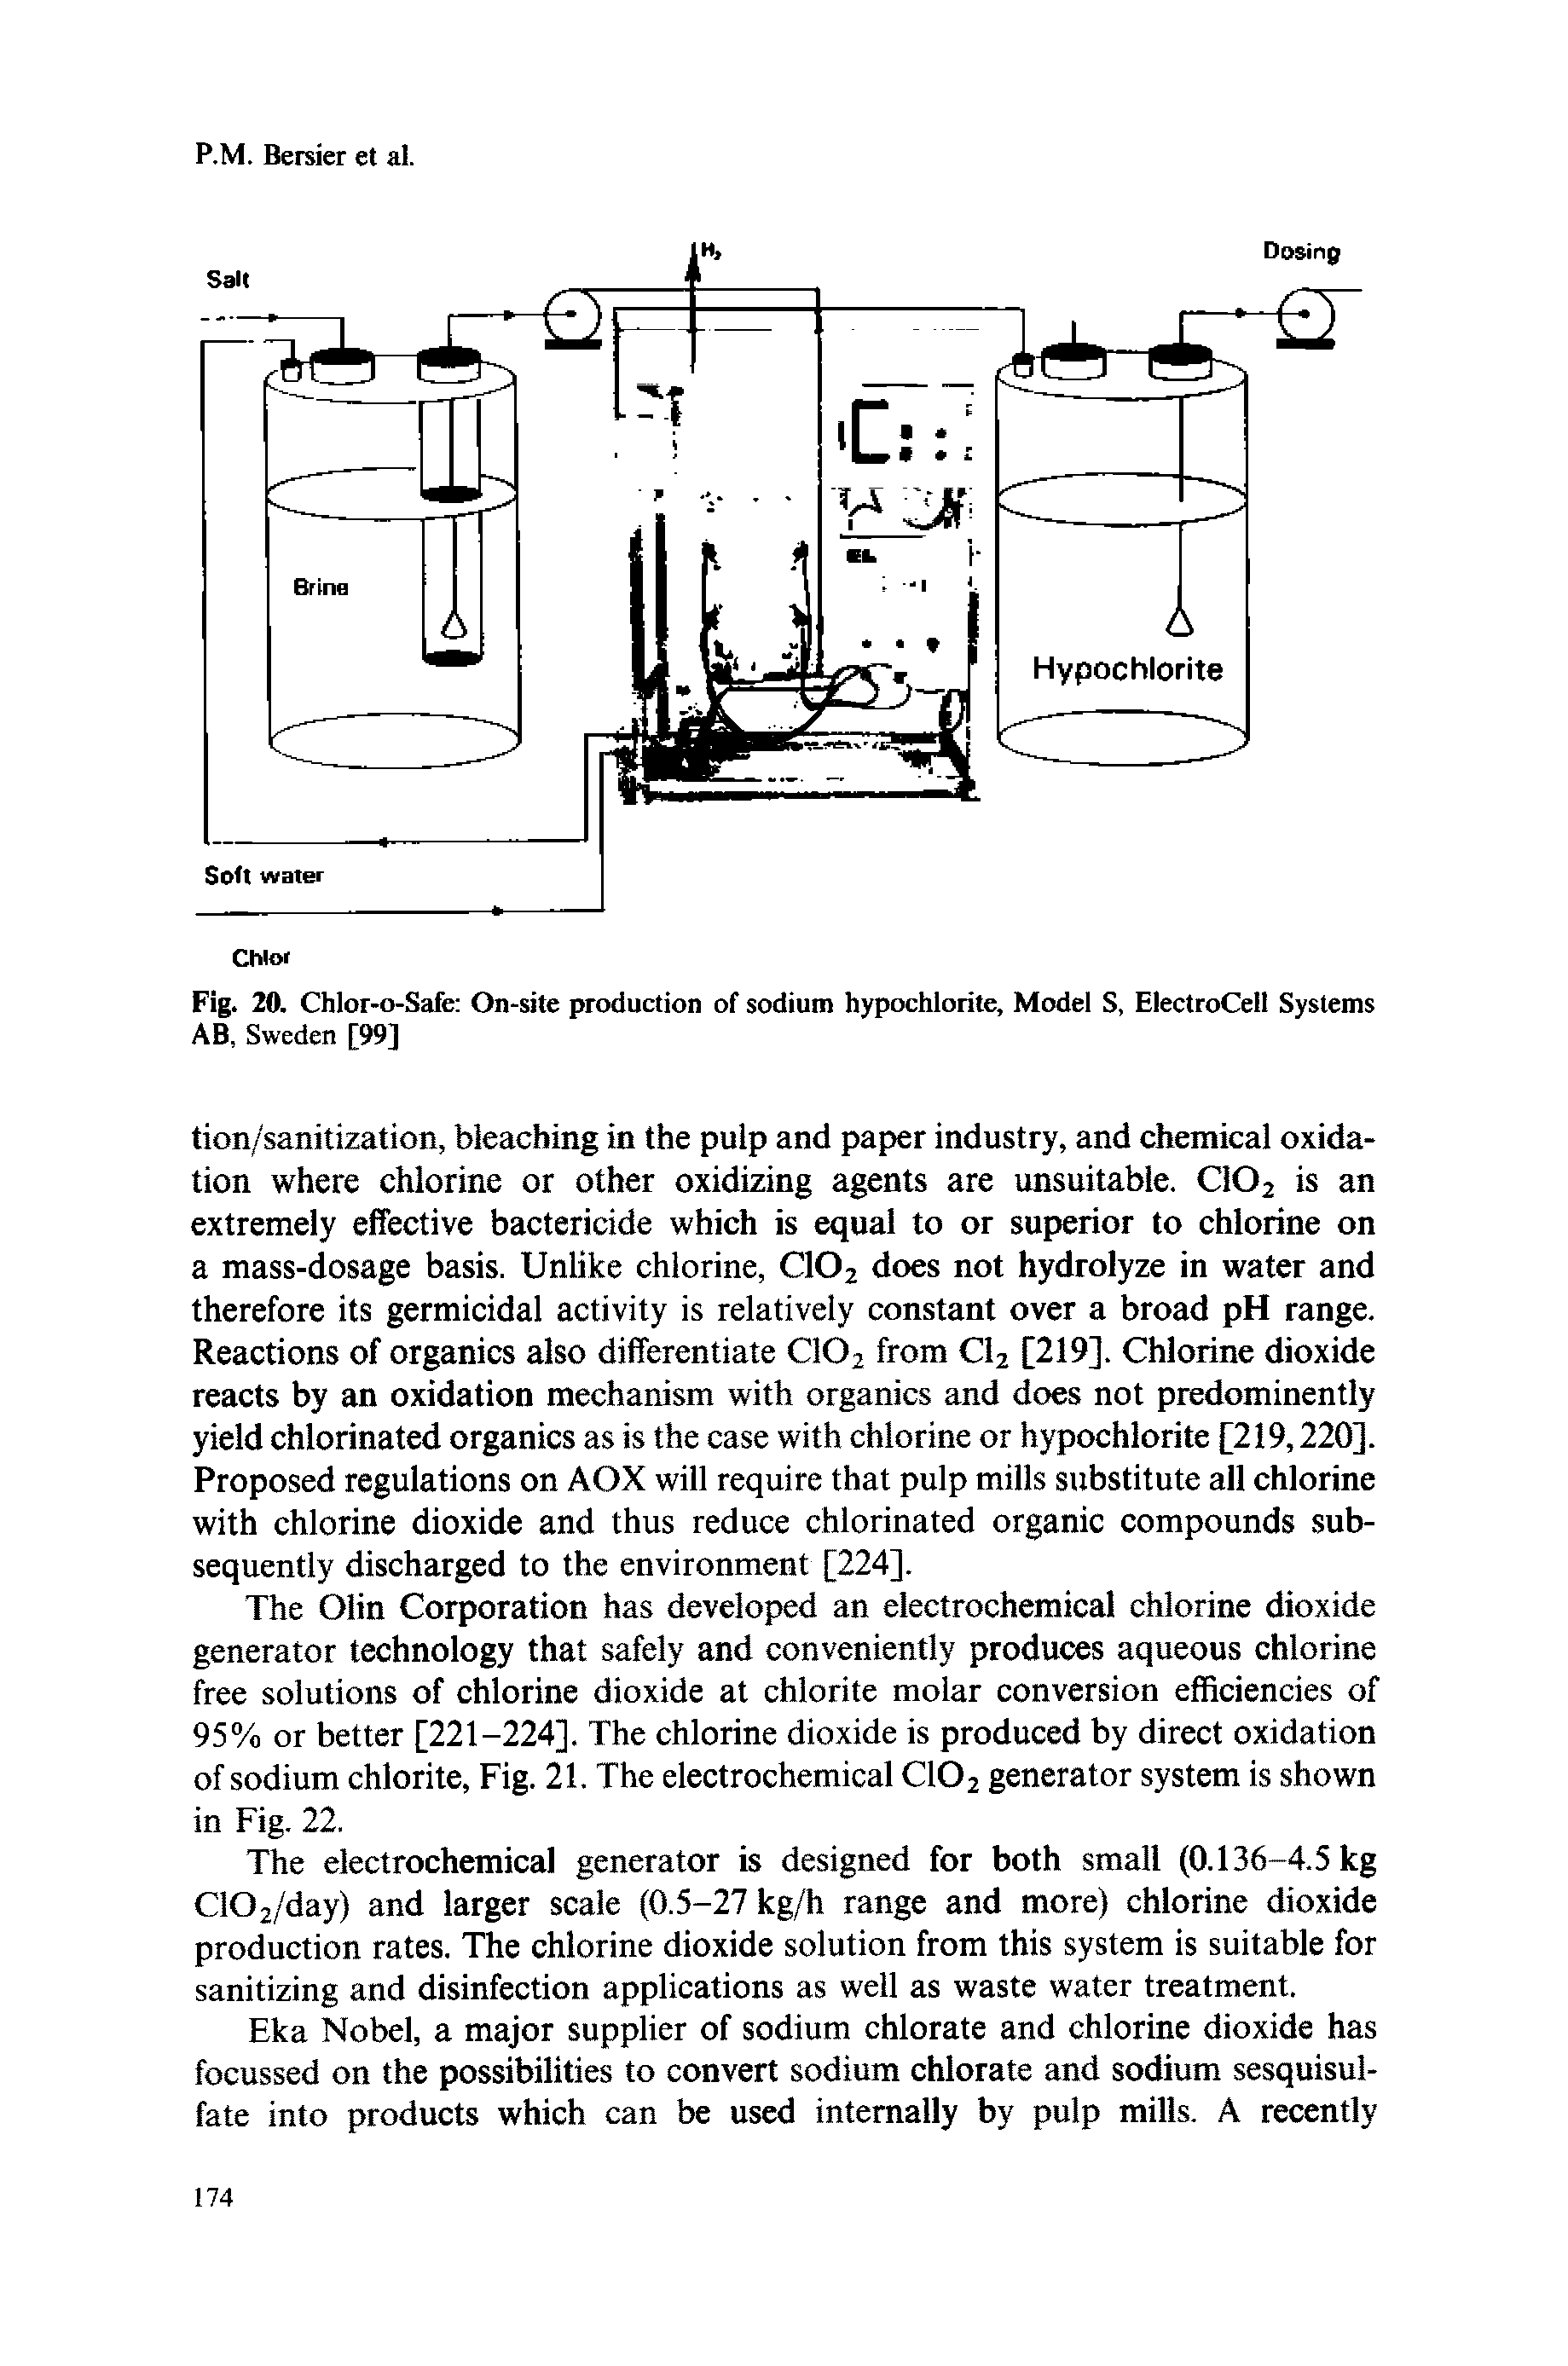 Fig. 20. Chlor-o-Safe On-site production of sodium hypochlorite, Model S, ElectroCell Systems AB. Sweden [99]...